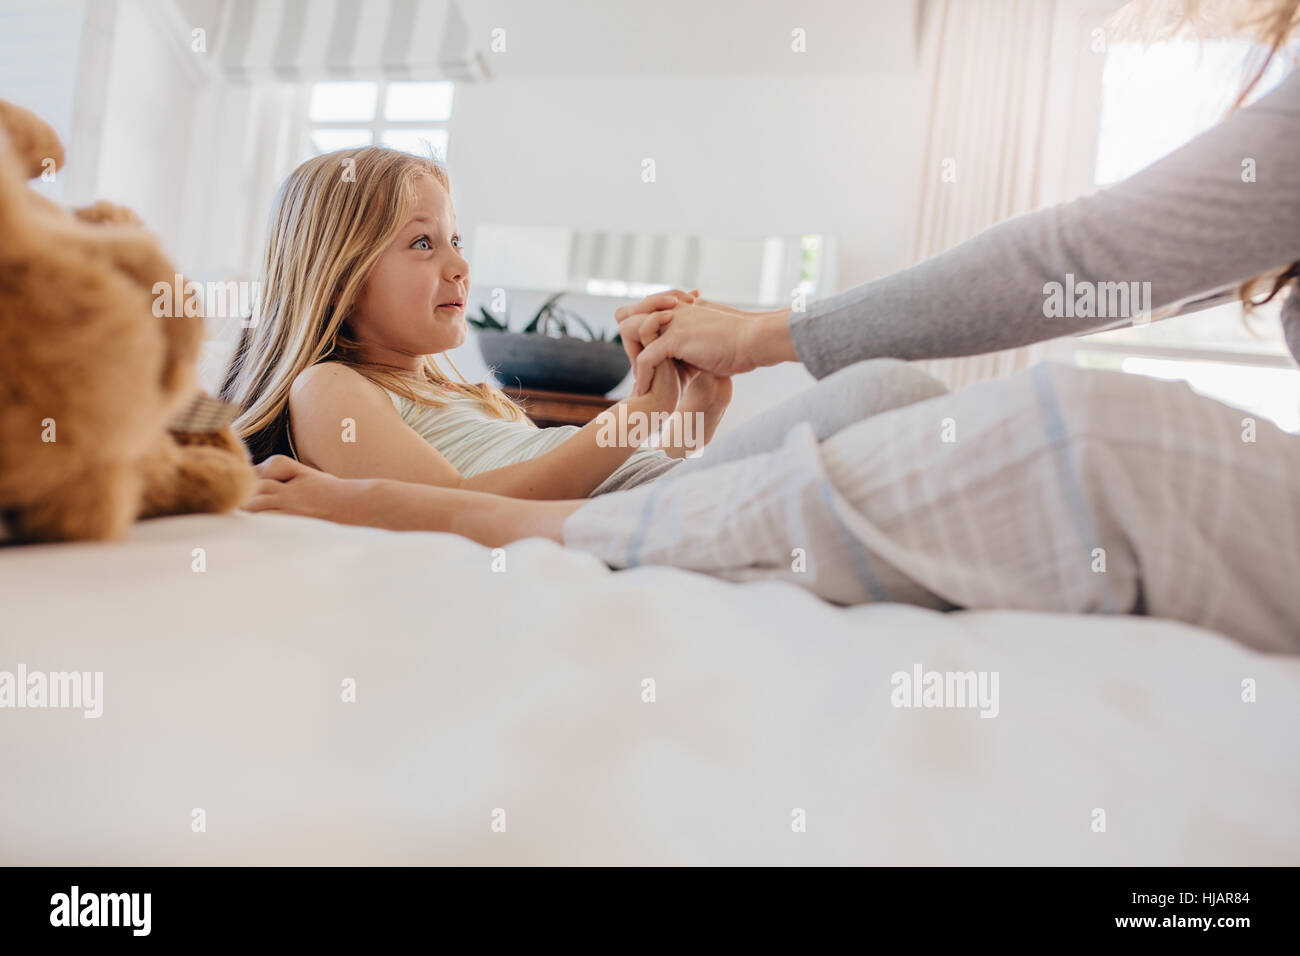 Shot of little girl lying on bed and laughing with her mother holding her hands. Girl playing with her mother in bedroom at home. Stock Photo